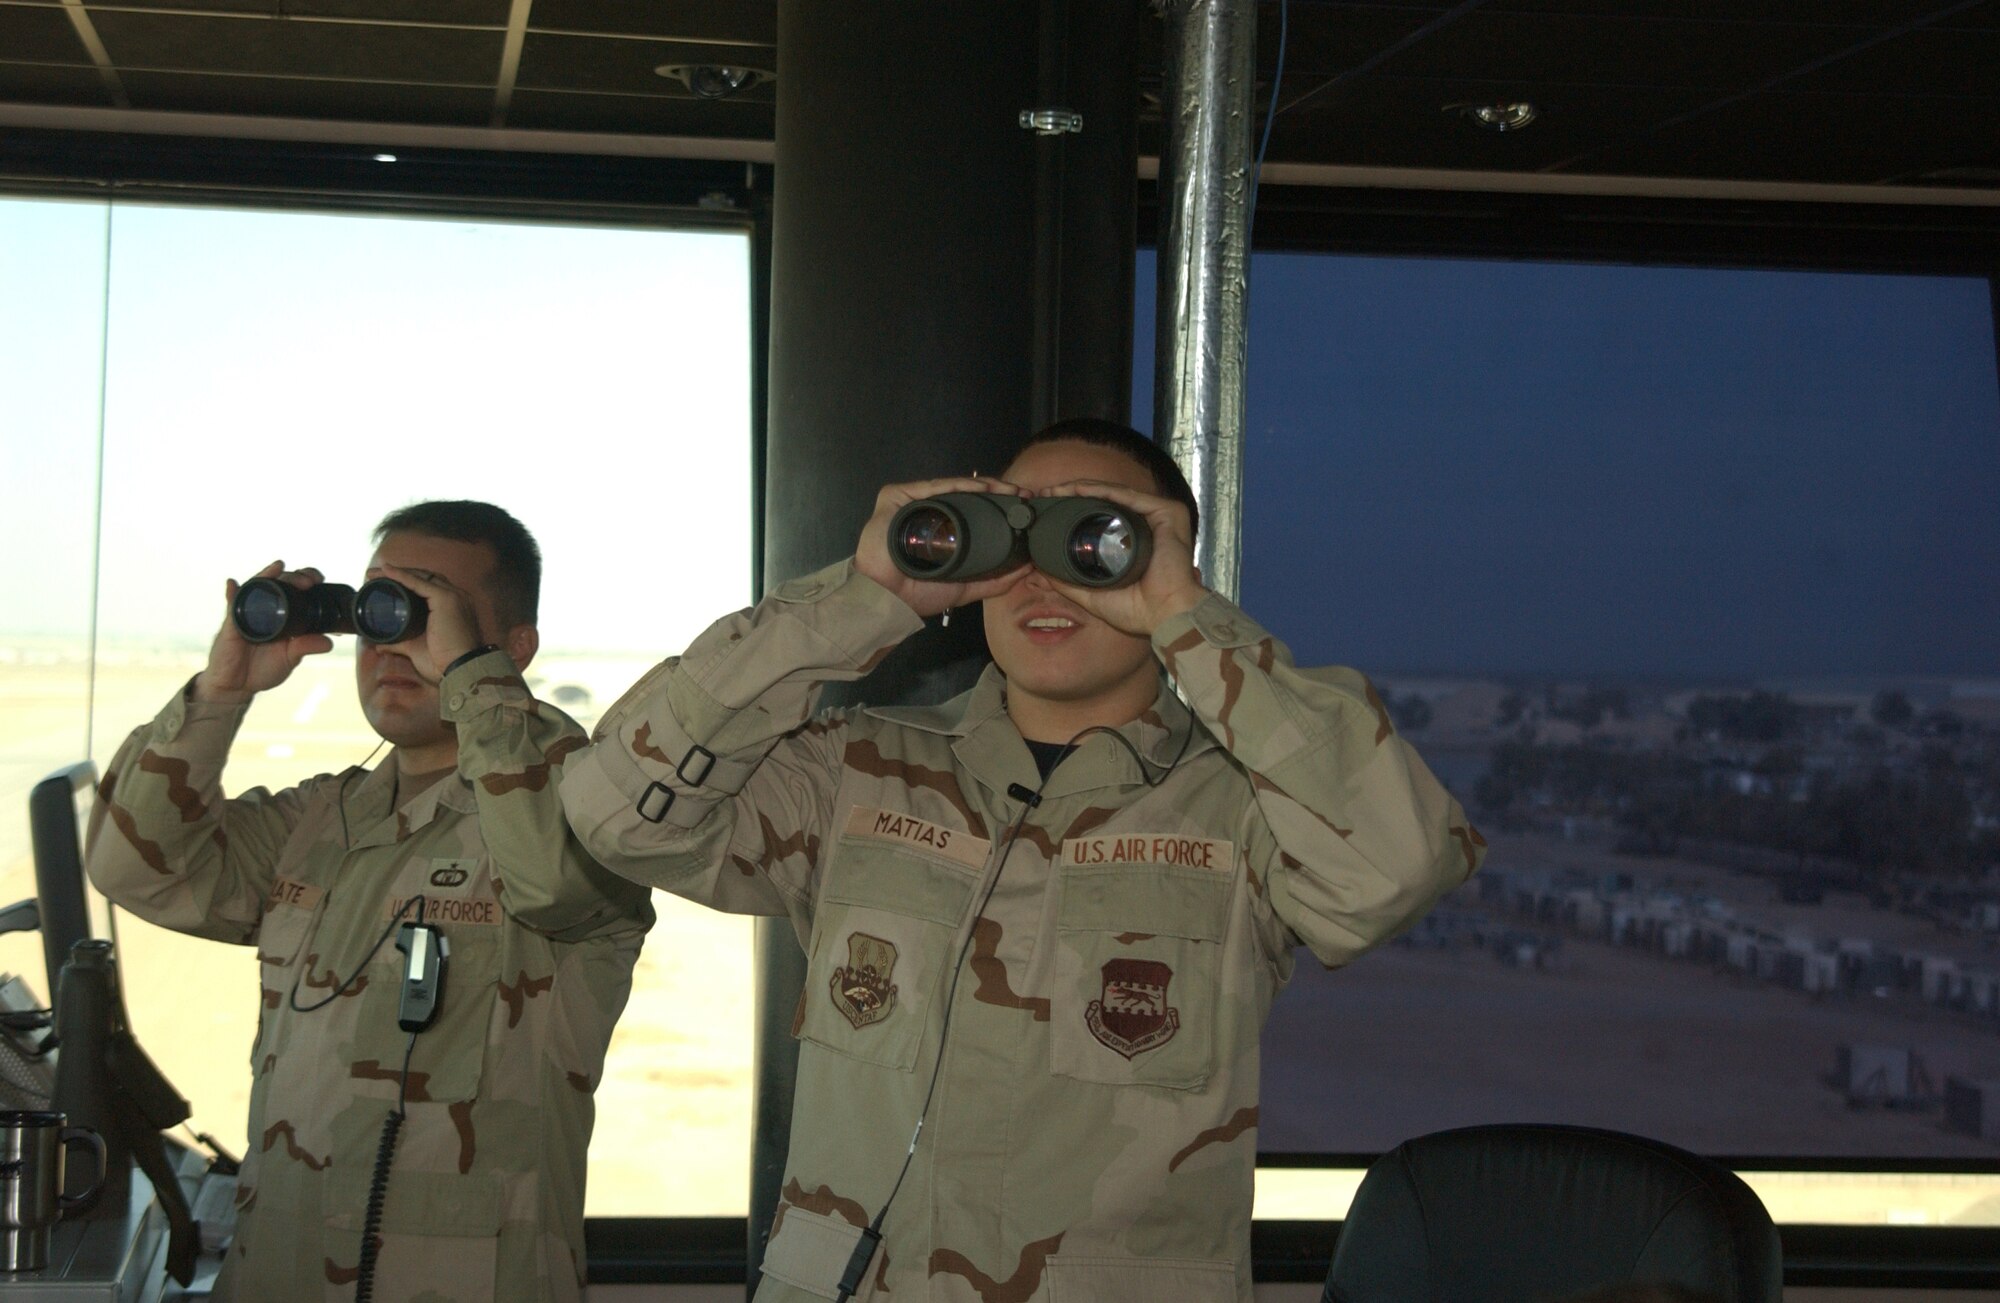 BALAD AIR BASE, Iraq -- Senior Airman Joshua Matias (right), 332nd Expeditionary Operations Support Squadron air traffic control apprentice, scans the Balad Air Base flightline Tuesday. Airman Matias was recognized with the 2006 Air Traffic Control Association Lingiam Odems Memorial Award. (U.S. Air Force photo by Senior Airman Josh Moshier)